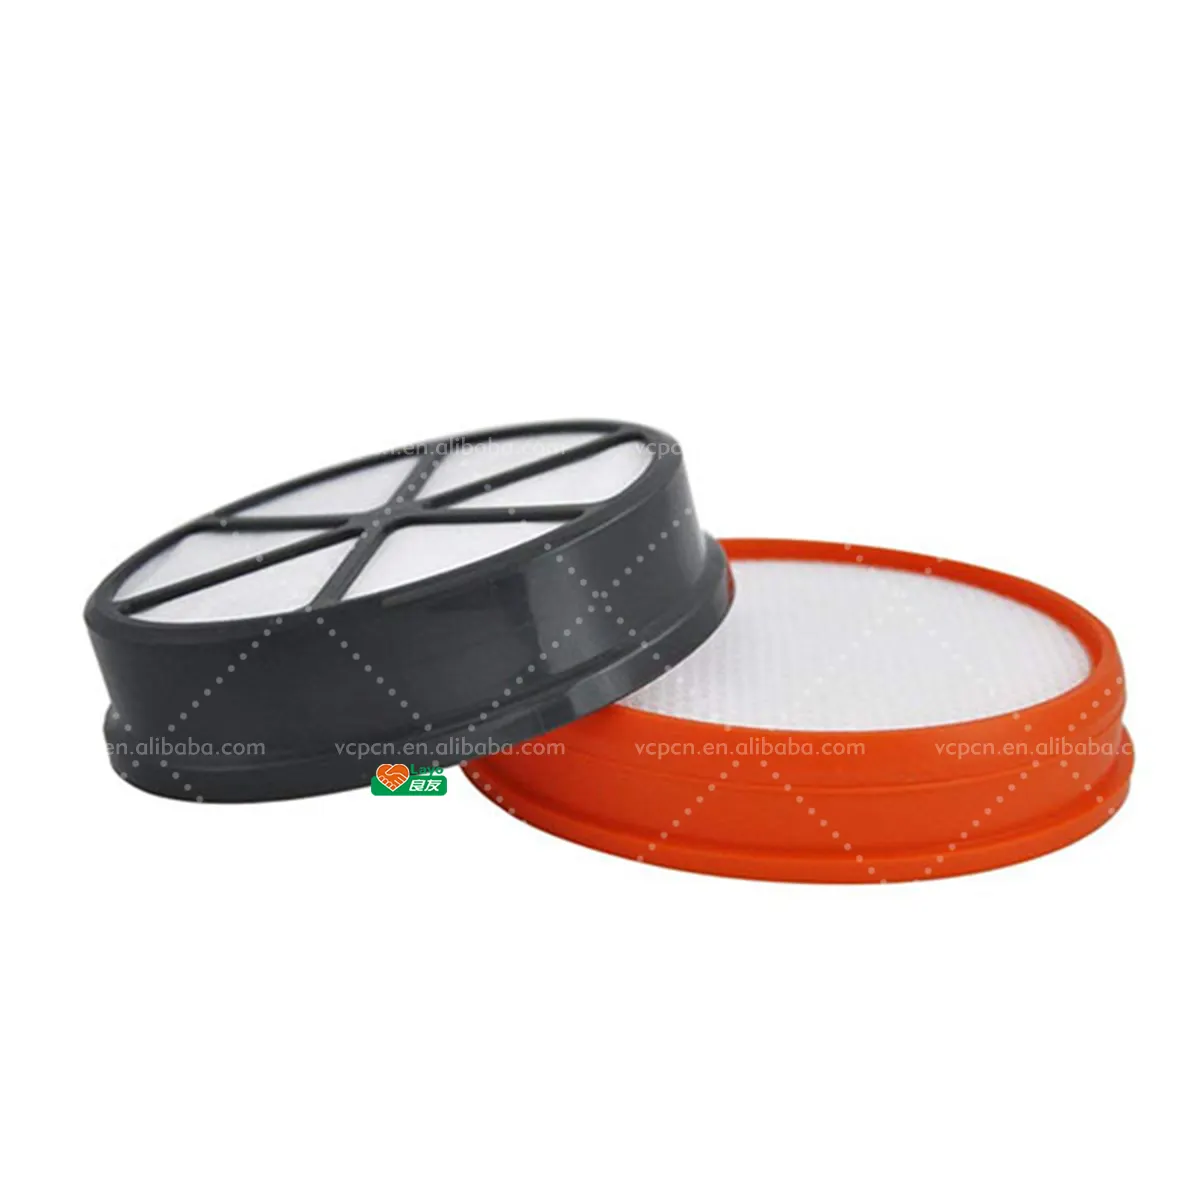 layo Replacement Hoover Vacuum Cleaner Filter Part for Hoover UH72400 UH72401 440003905 303903001 Vax Type 90 Post Motor Filter